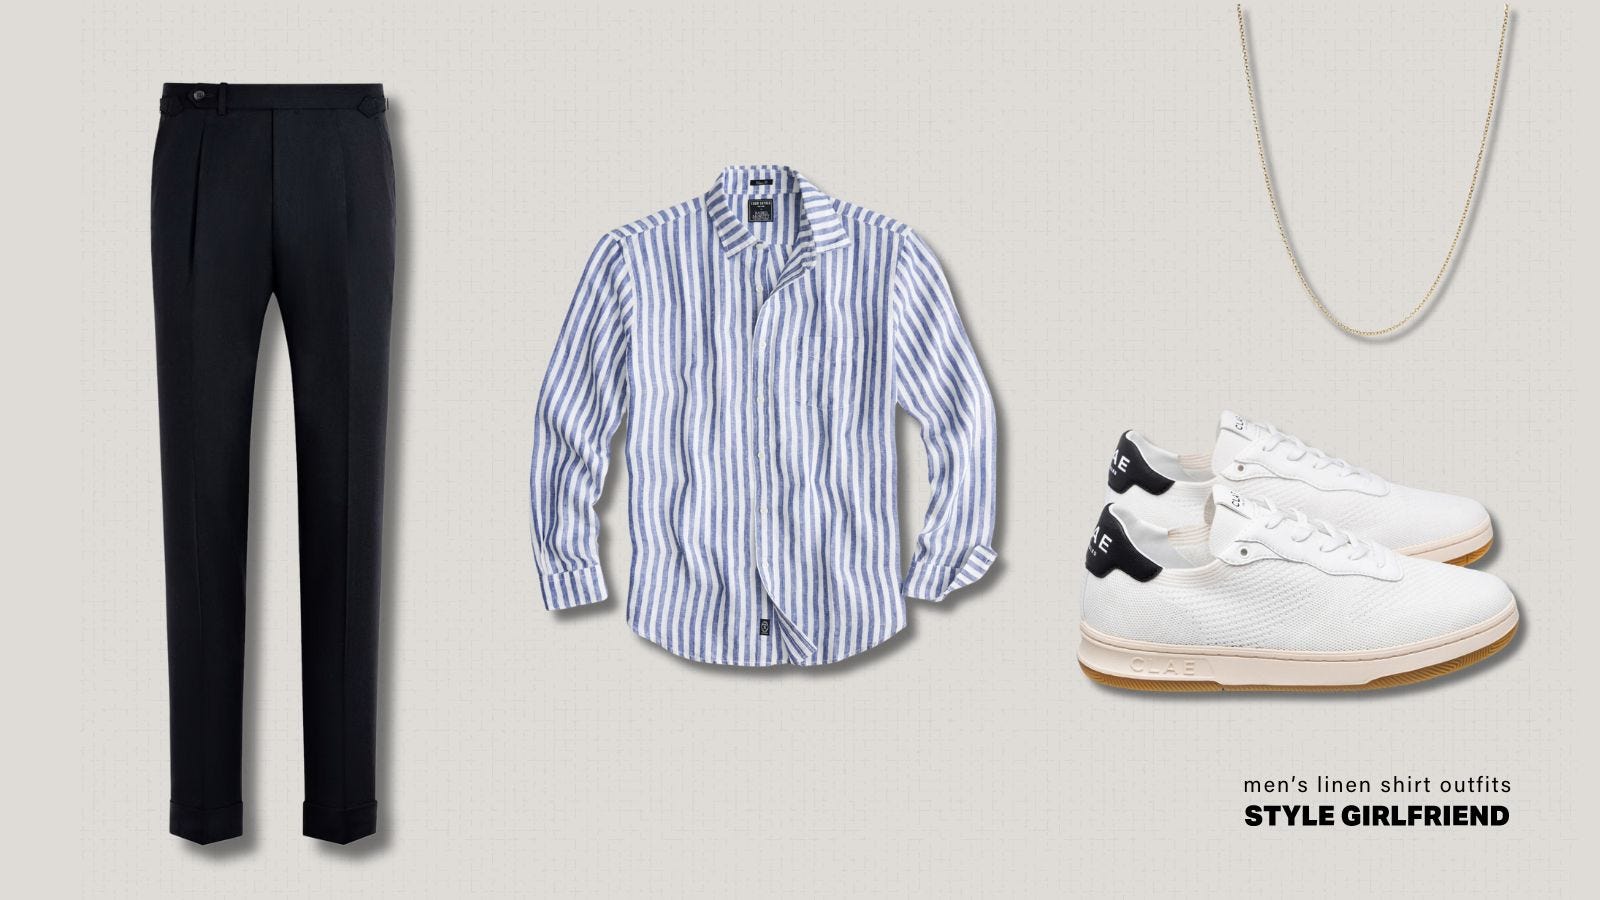 Formal casual menswear with linen shirt and label pants paired with white sneakers